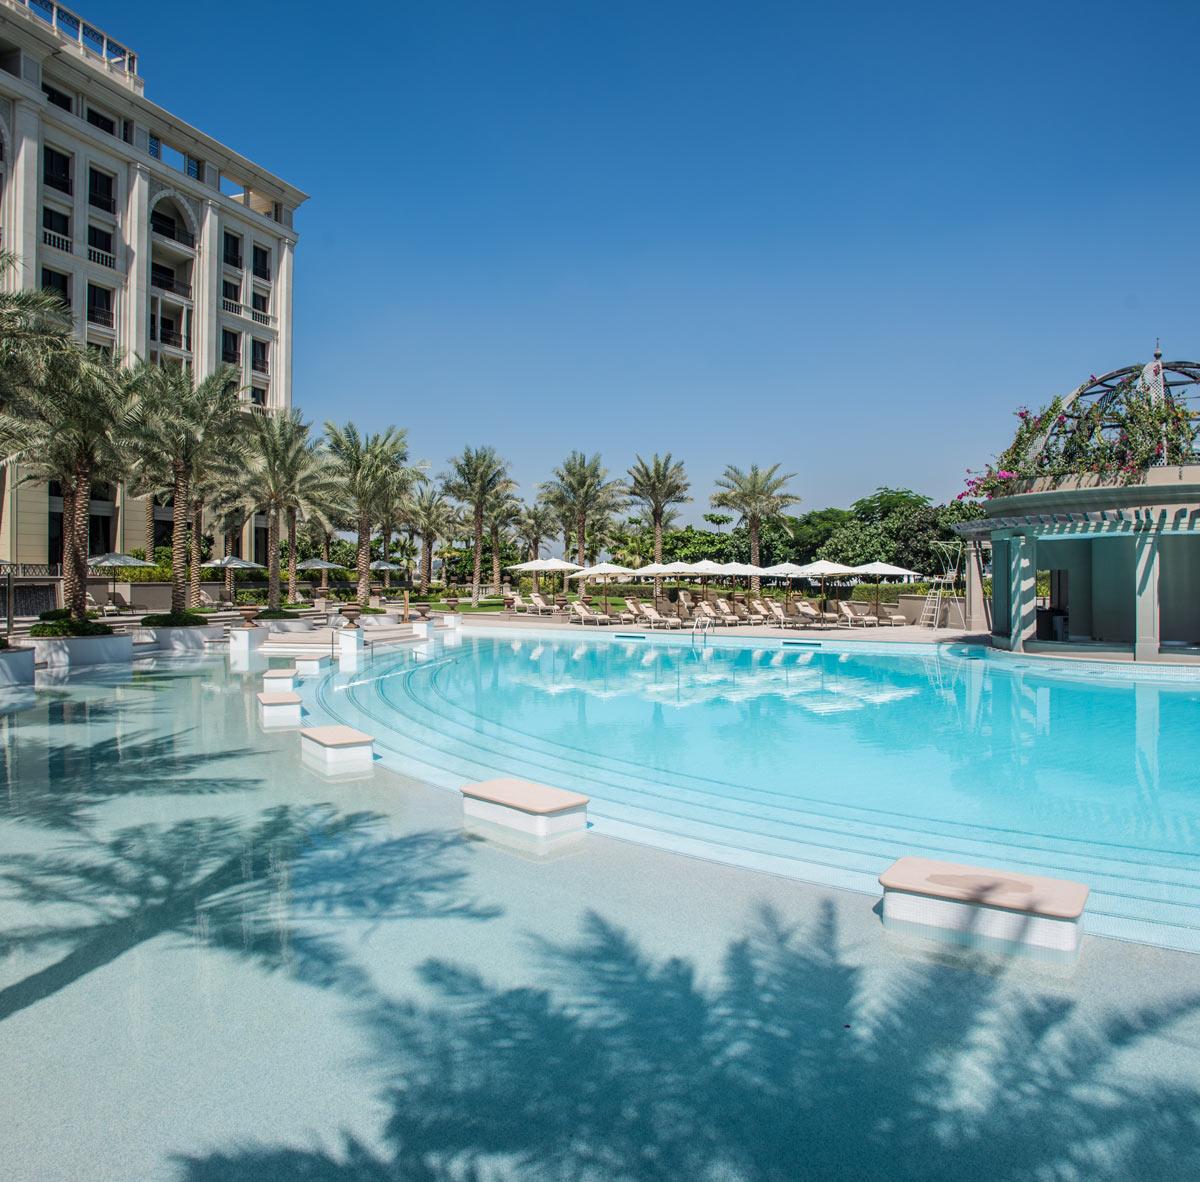 In addition to the guestrooms, the hotel includes an internal courtyard for dining, three outdoor swimming pools, landscaped gardens and a spa / Palazzo Versace Dubai